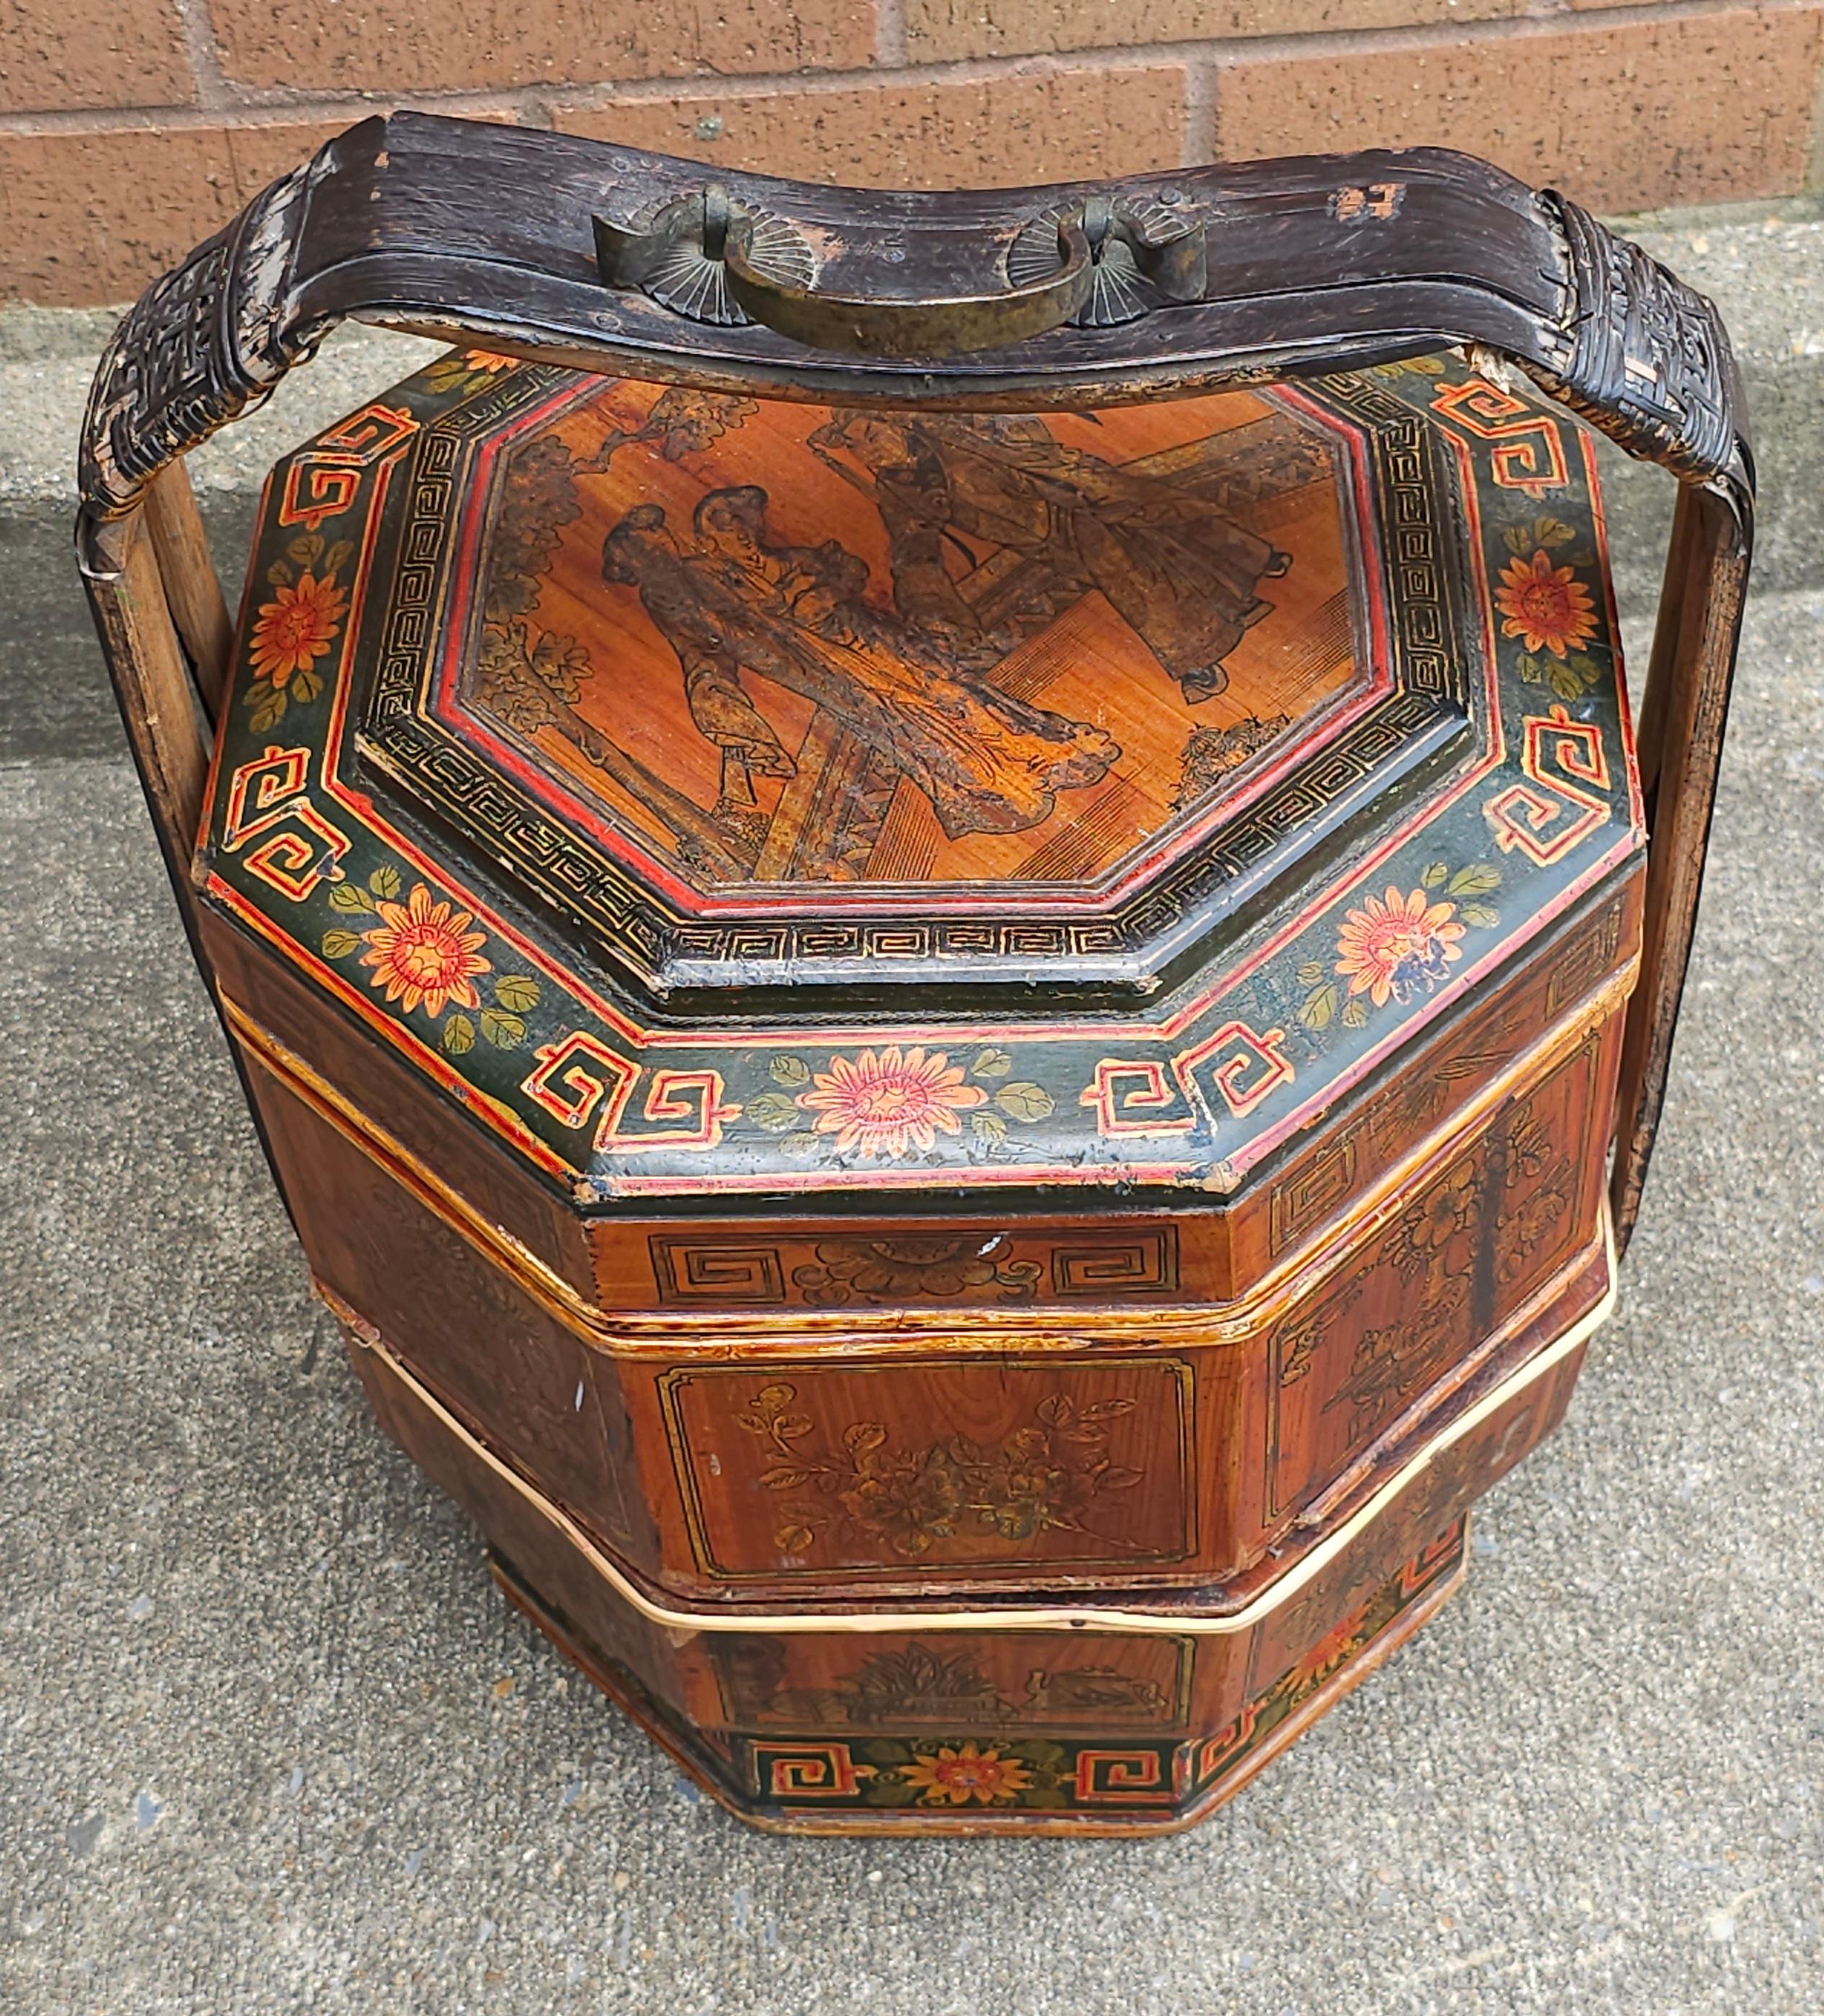 Chinese Export 19th Century Asian Two-Tier Lacquered And Decorated Handled Basket For Sale